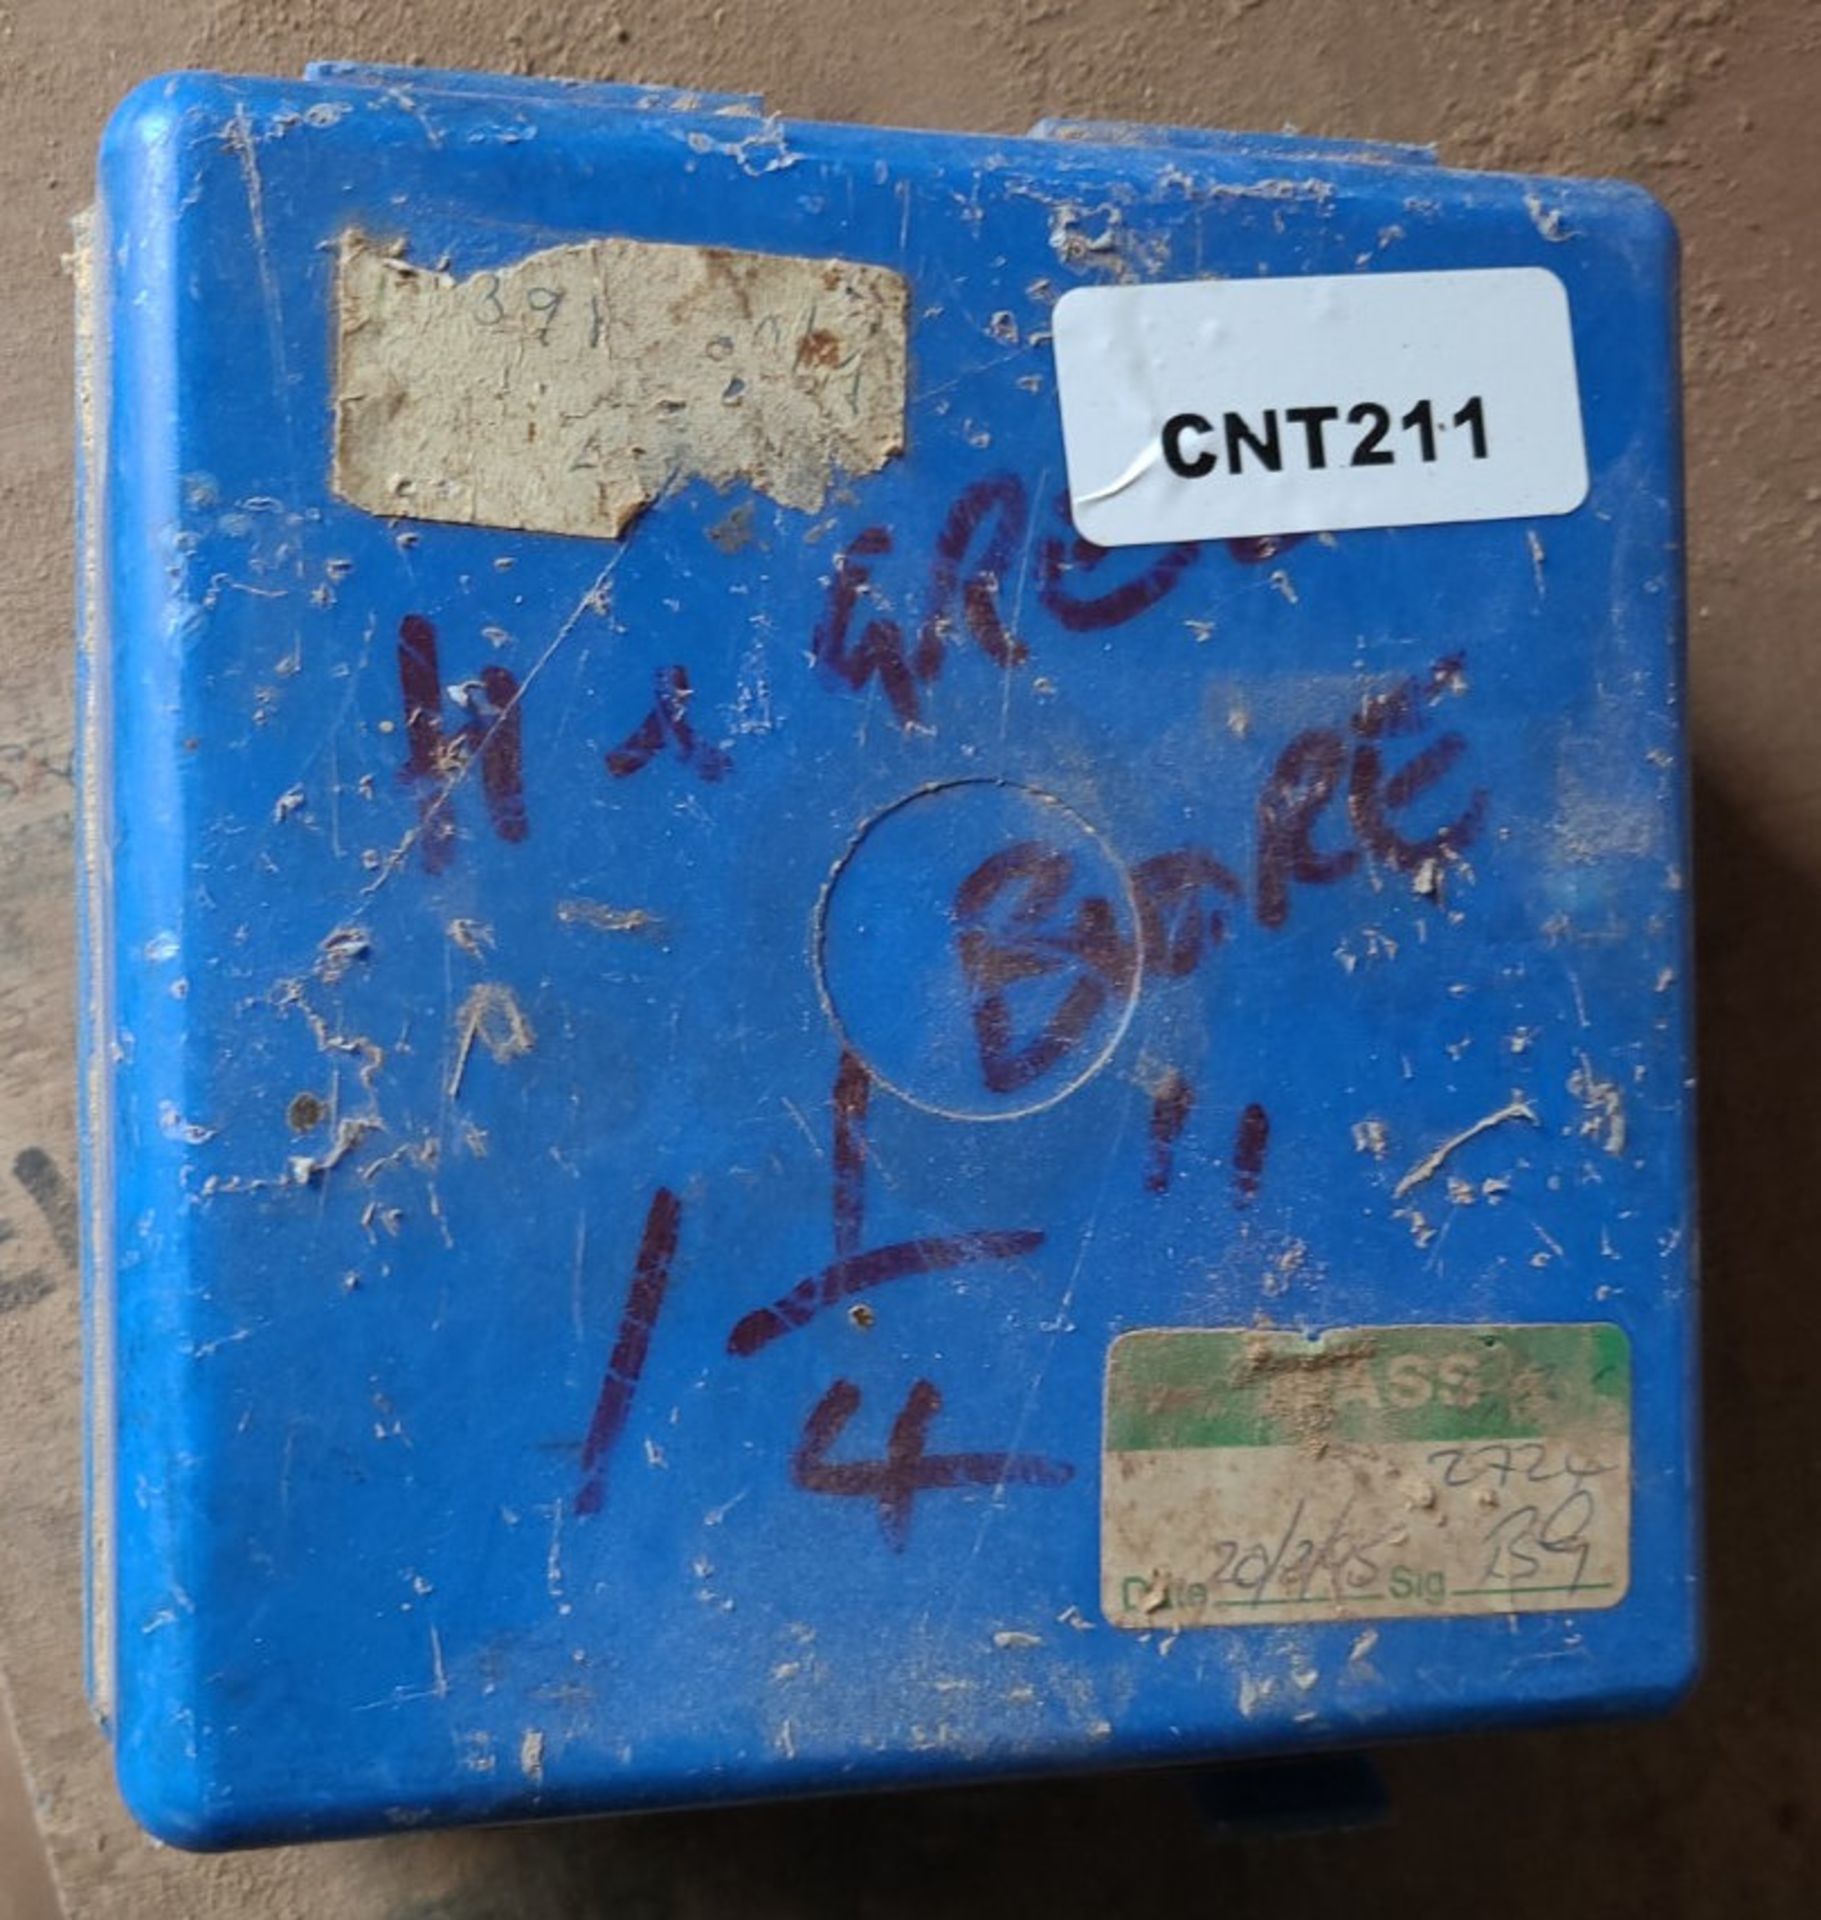 1 x 1 1/4" Leuco Cutter Head (Profile Block 2") - Ref: CNT211 - CL846 - Location: Oxford OX2This lot - Image 4 of 5